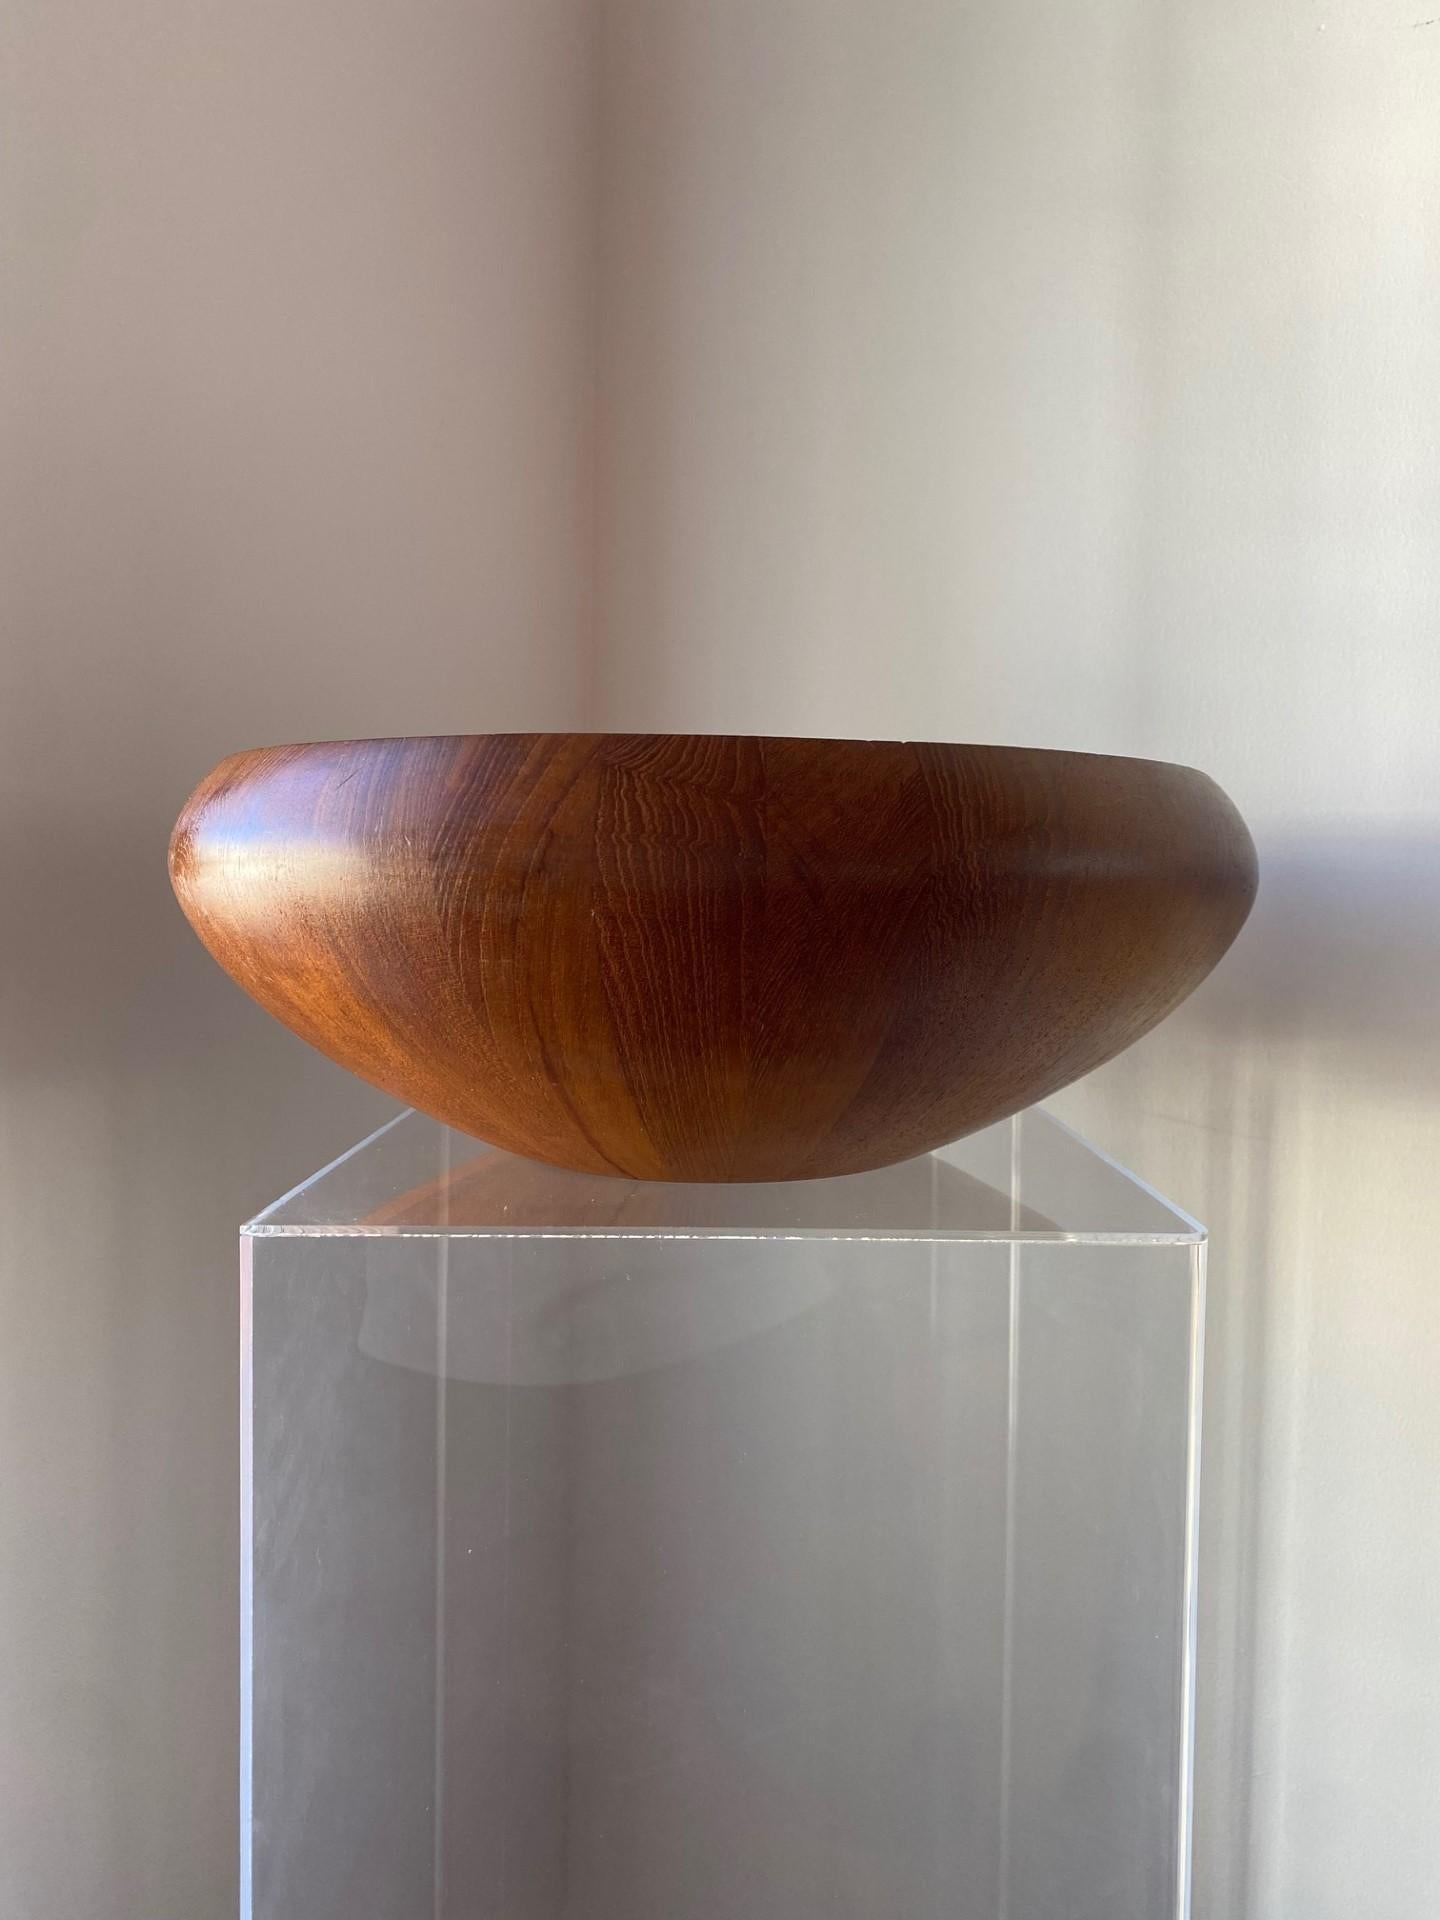 Large bowl designed by Jens Harald Quistgaard. Produced in Denmark by Dansk during the 1950s. Made from solid staved teak. Good vintage condition. Aside from its utilitarian duty, this piece transcends to sculpture.  Large and with its defined